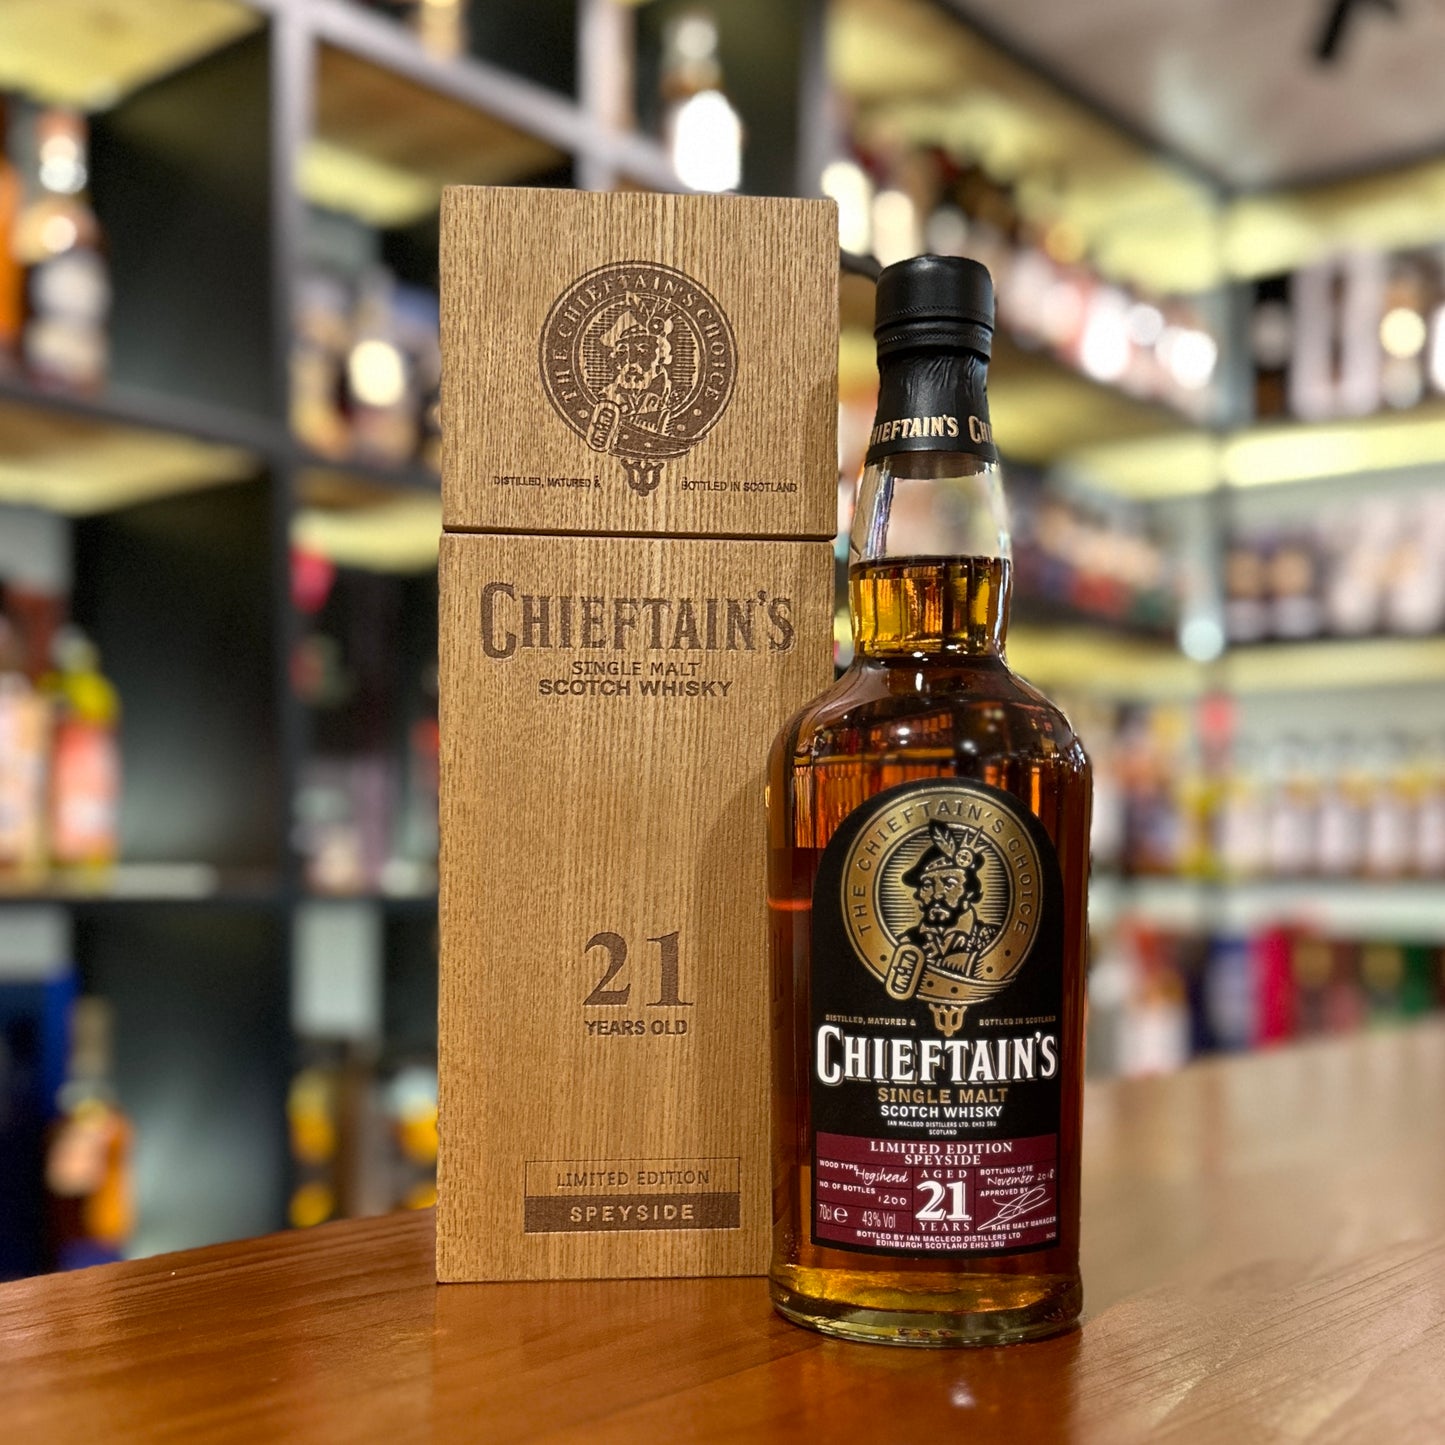 Chieftain’s 21 Year Old Speyside Limited Edition Single Malt Scotch Whisky